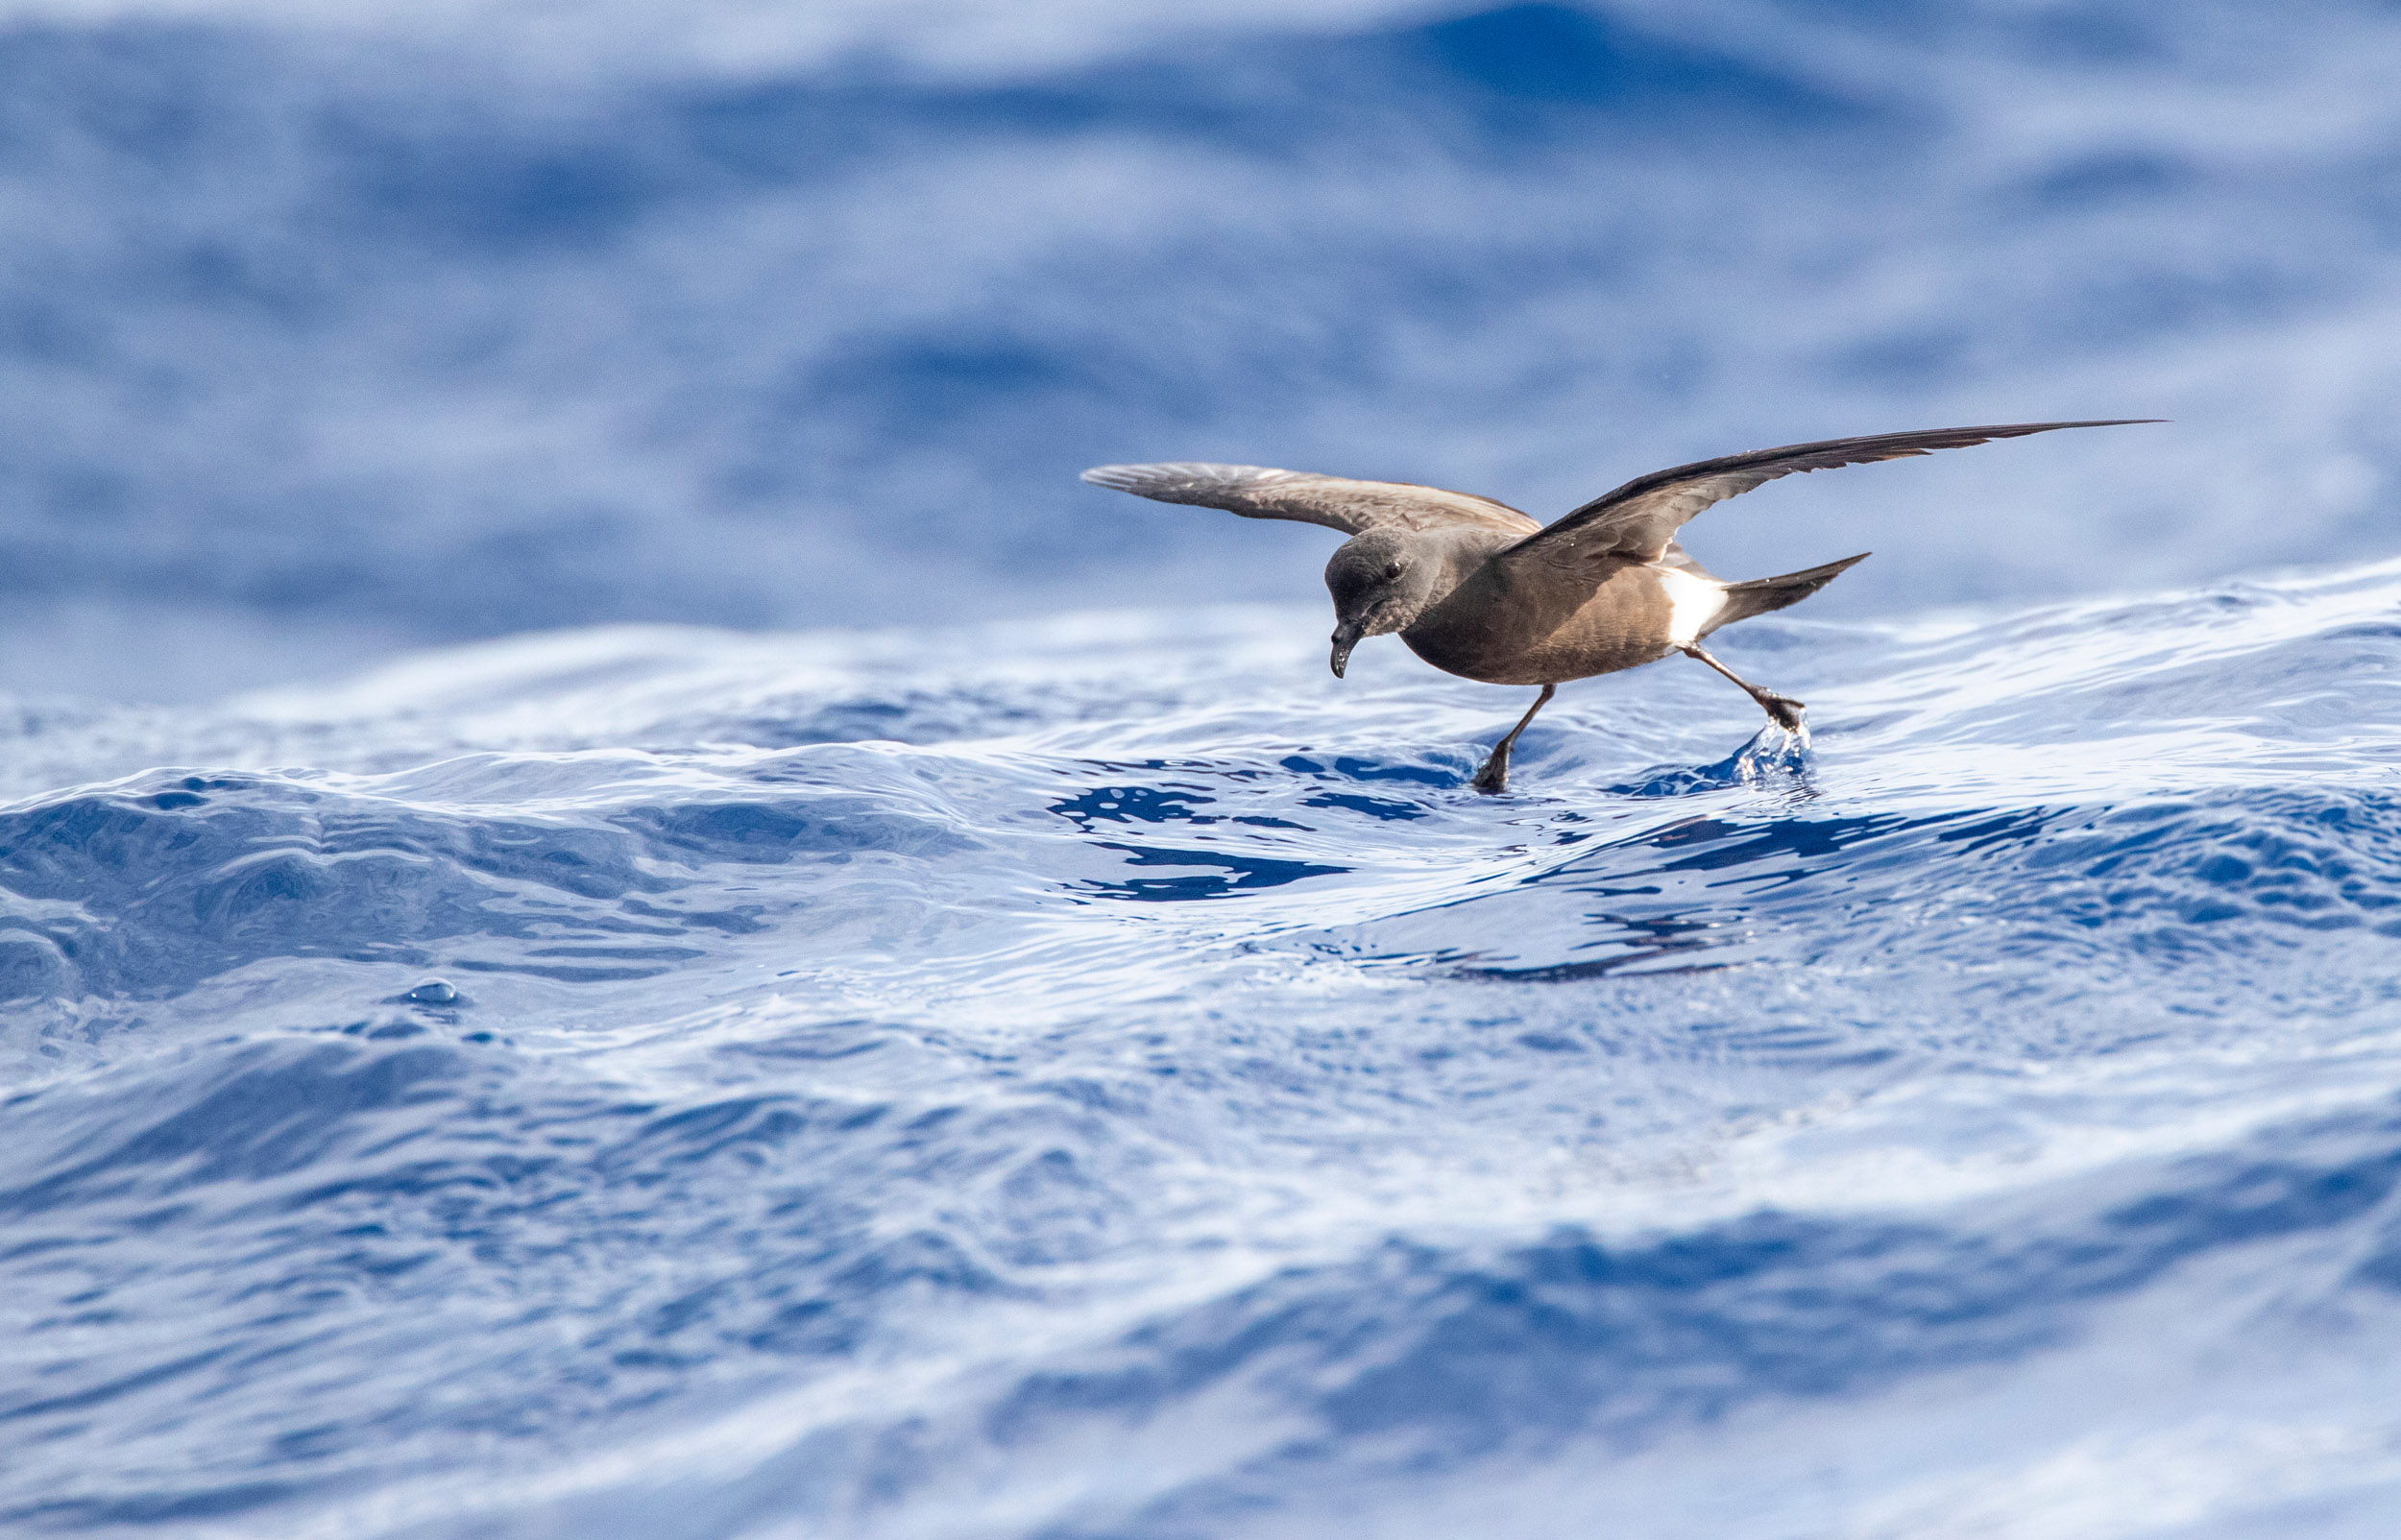 A lone Storm Petrel flying low over a wavy sea.